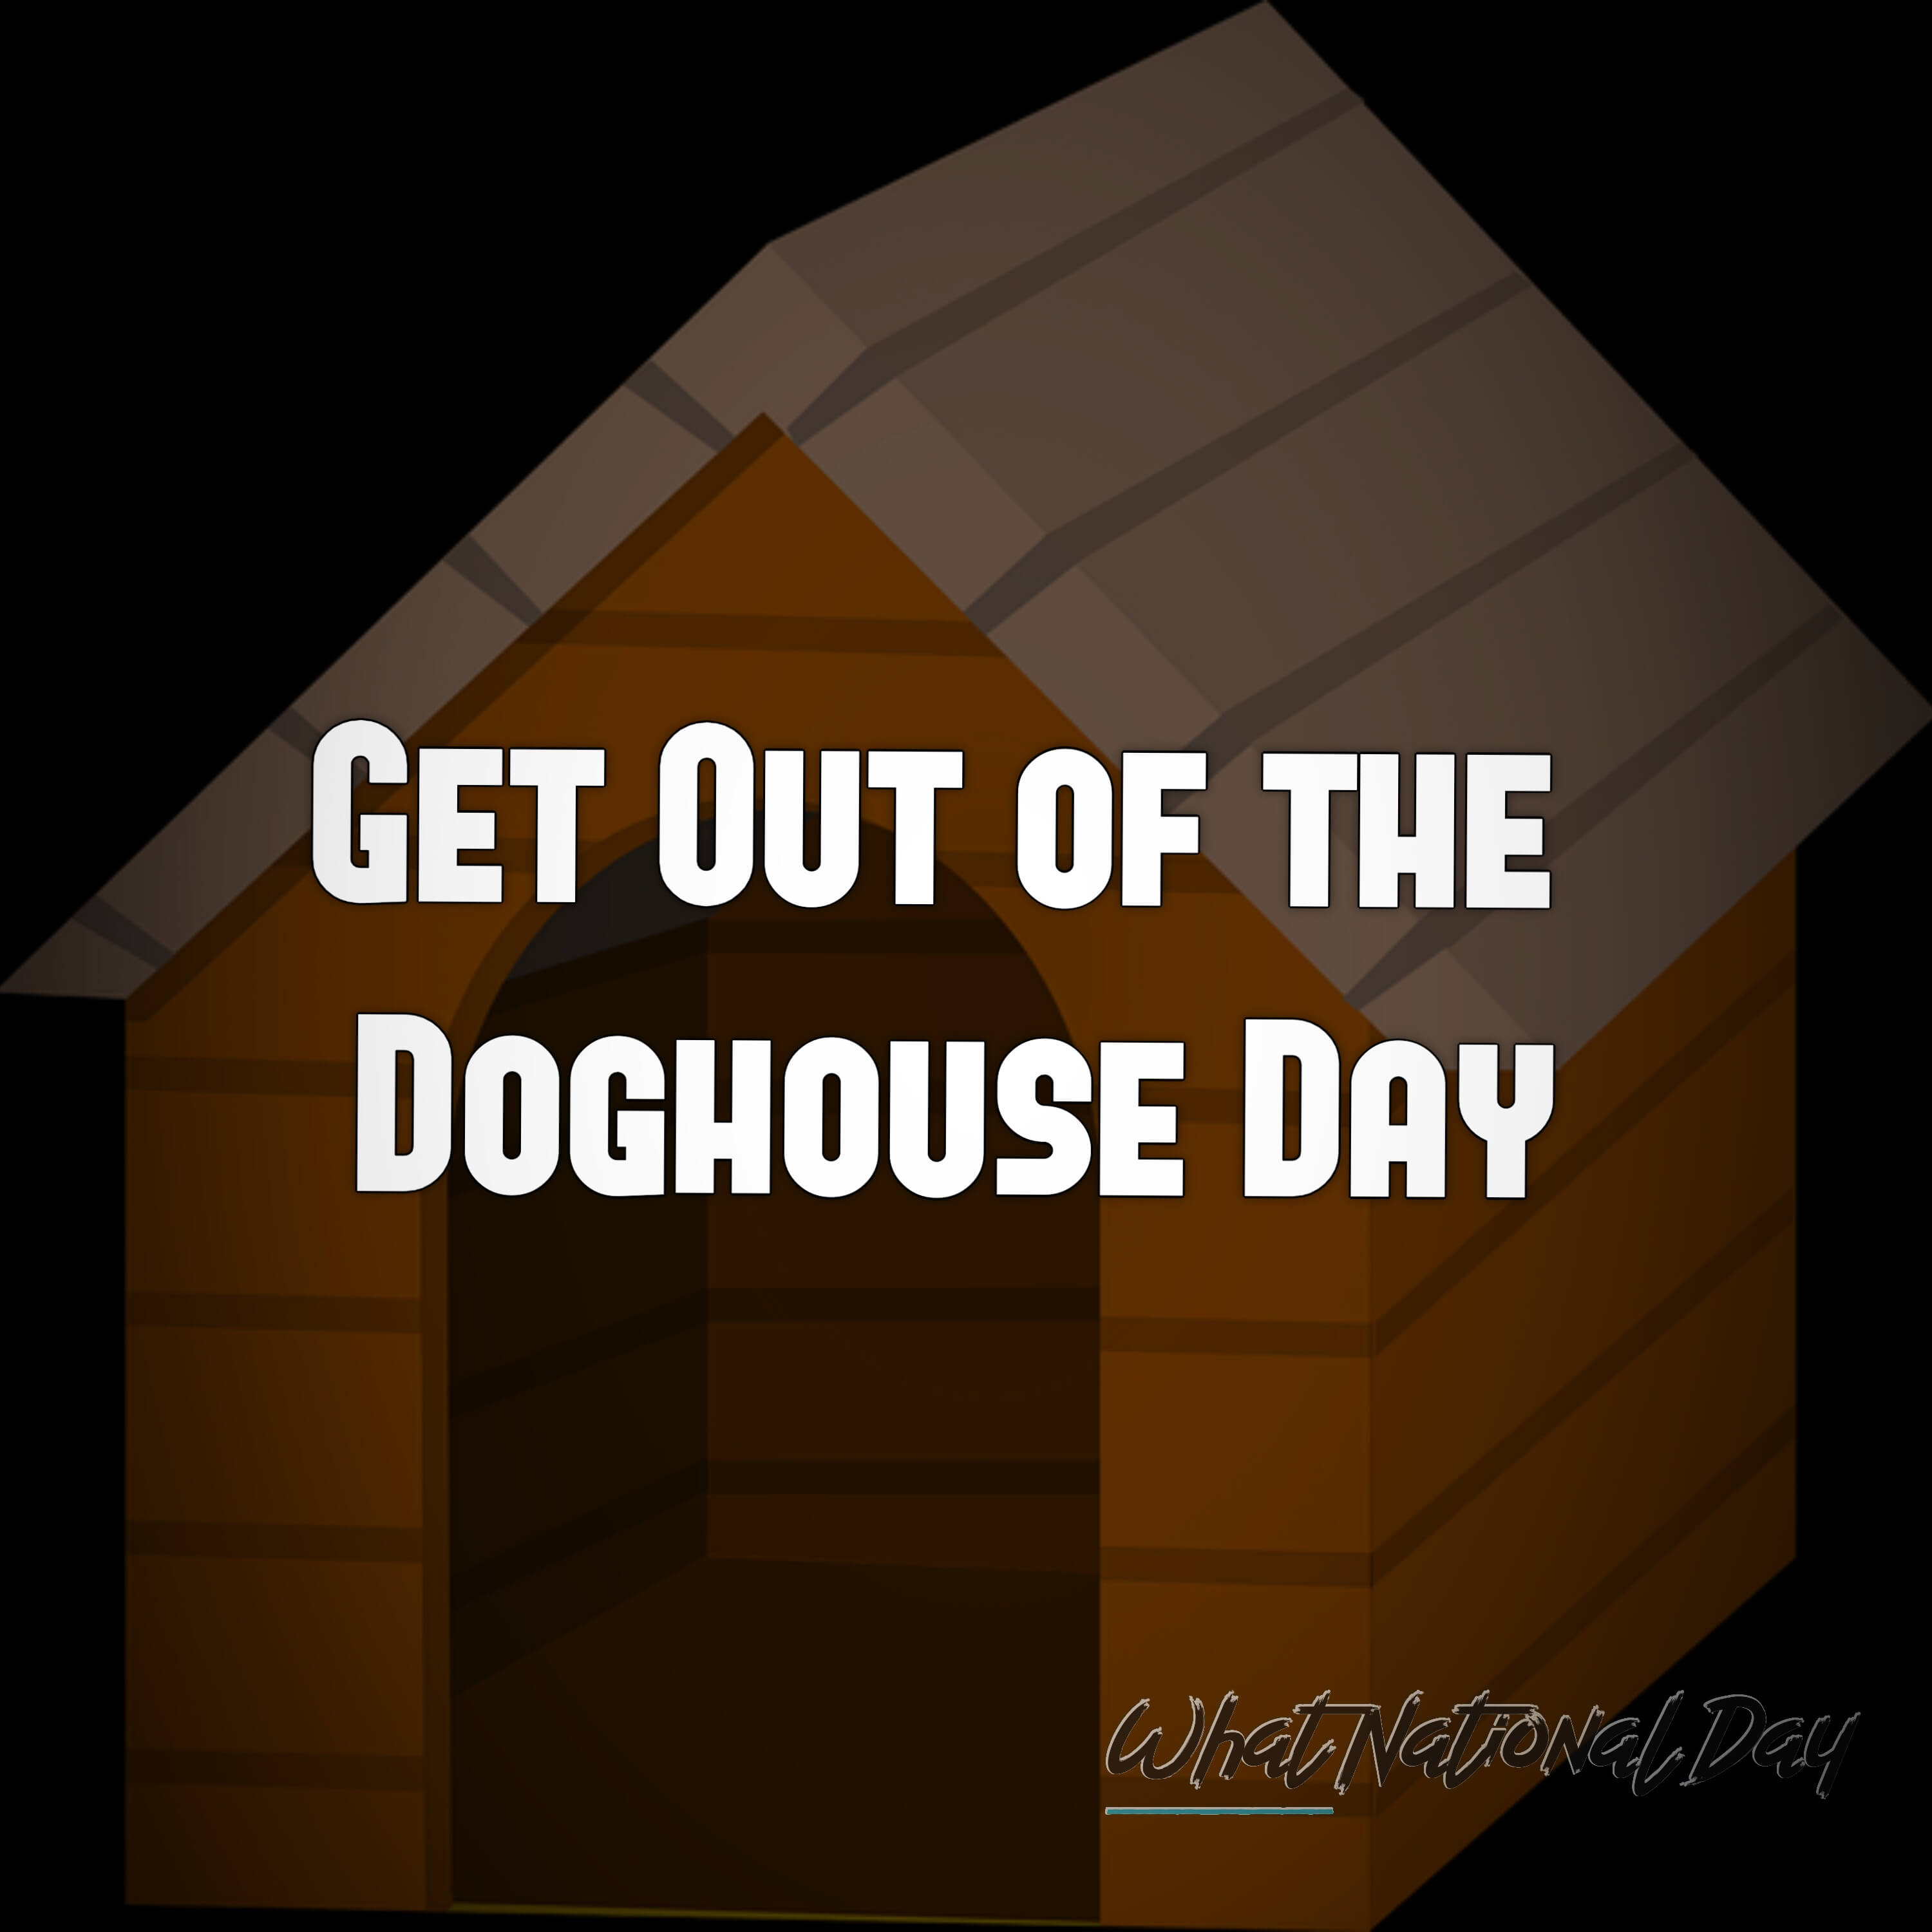 Get Out of the Doghouse Day